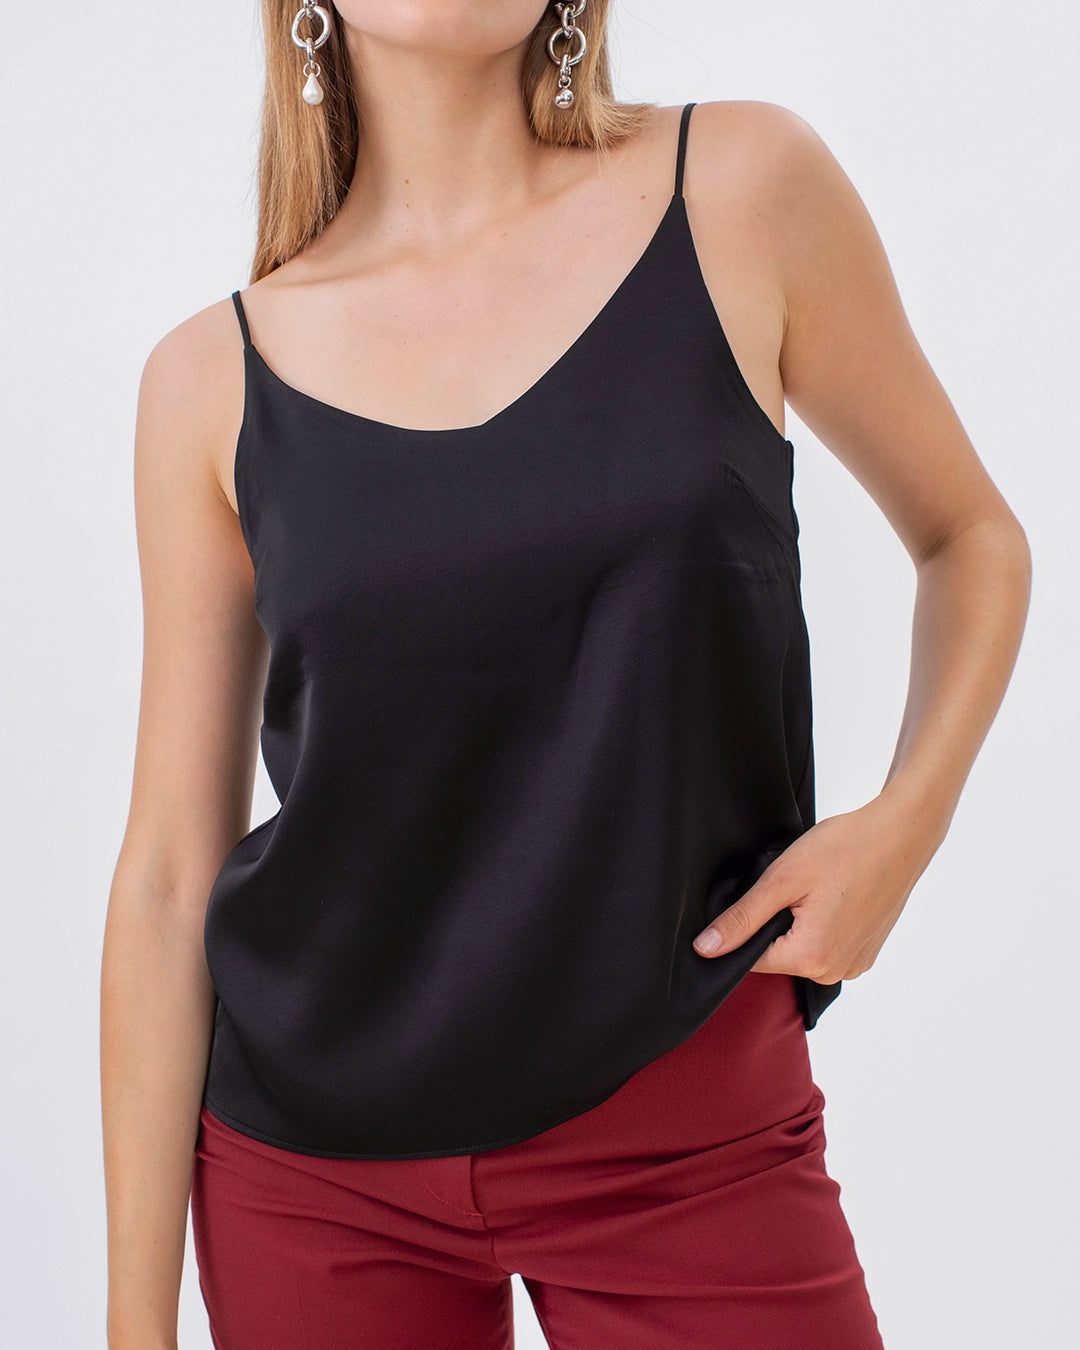 top-caraco-black-thin-patterns-made-in-europe-french-tailor-brand-for-women-